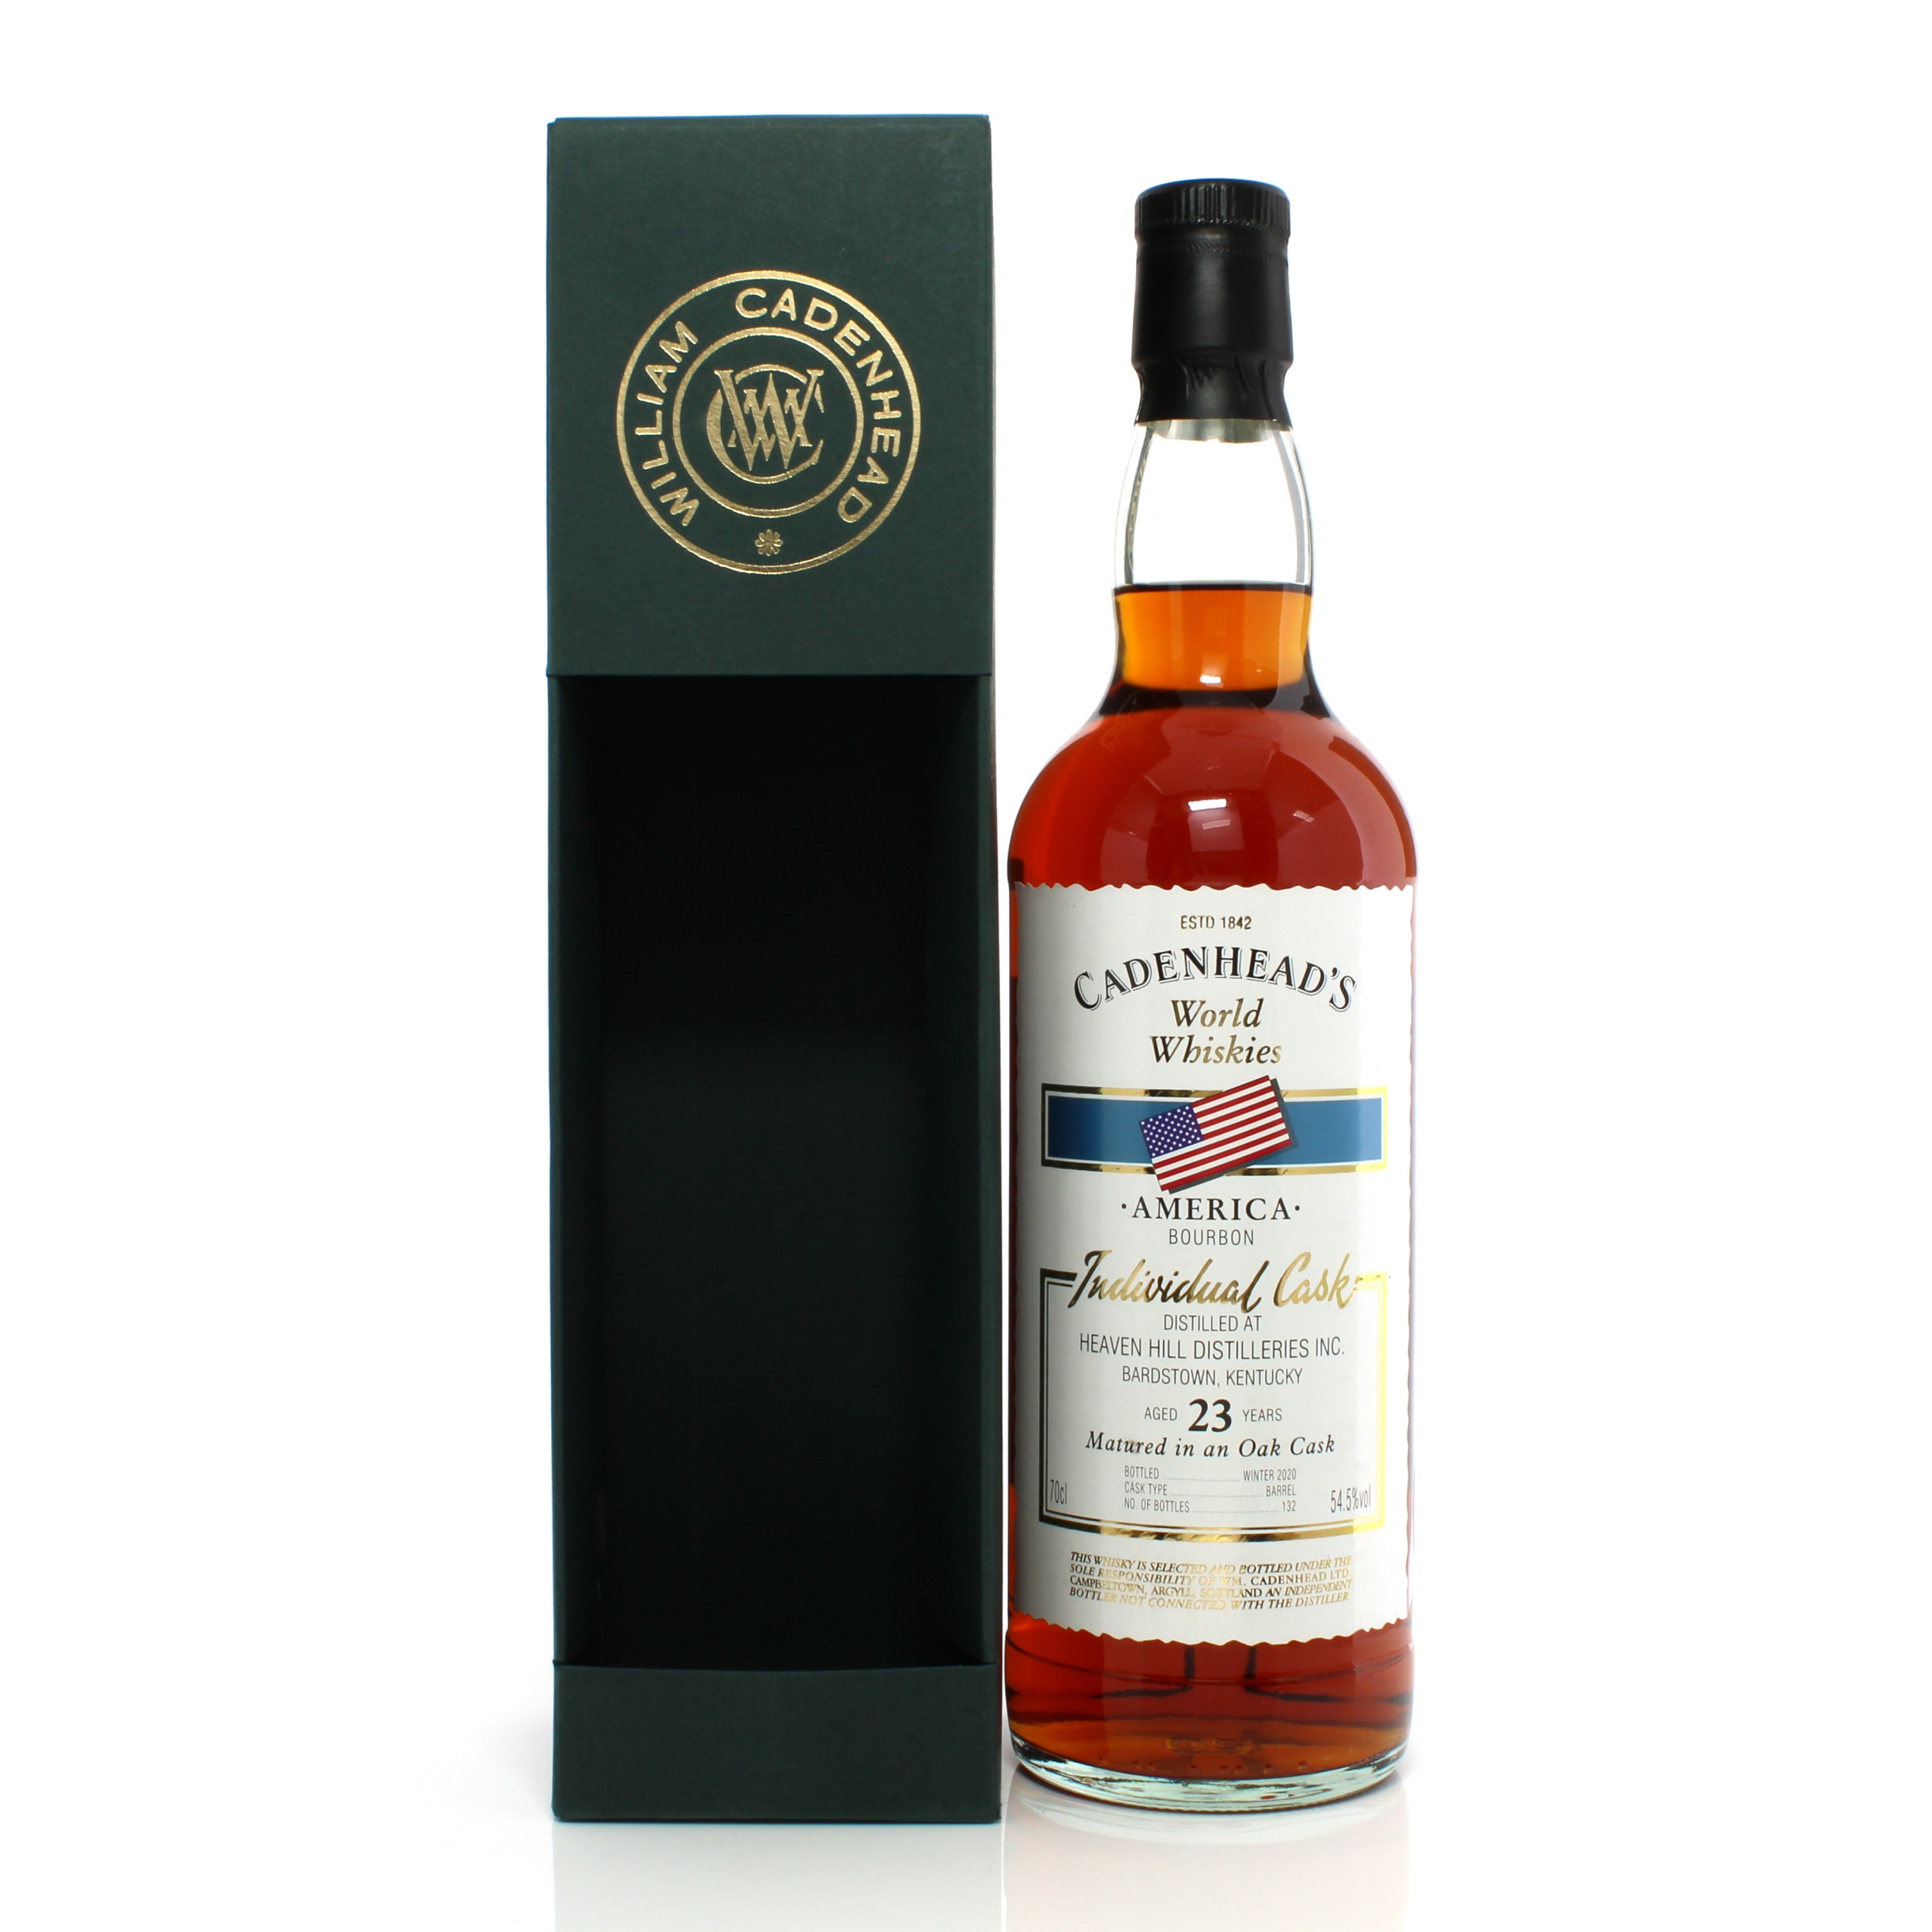 heaven-hill-23-year-old-single-cask-cadenhead-s-world-whiskies-auction